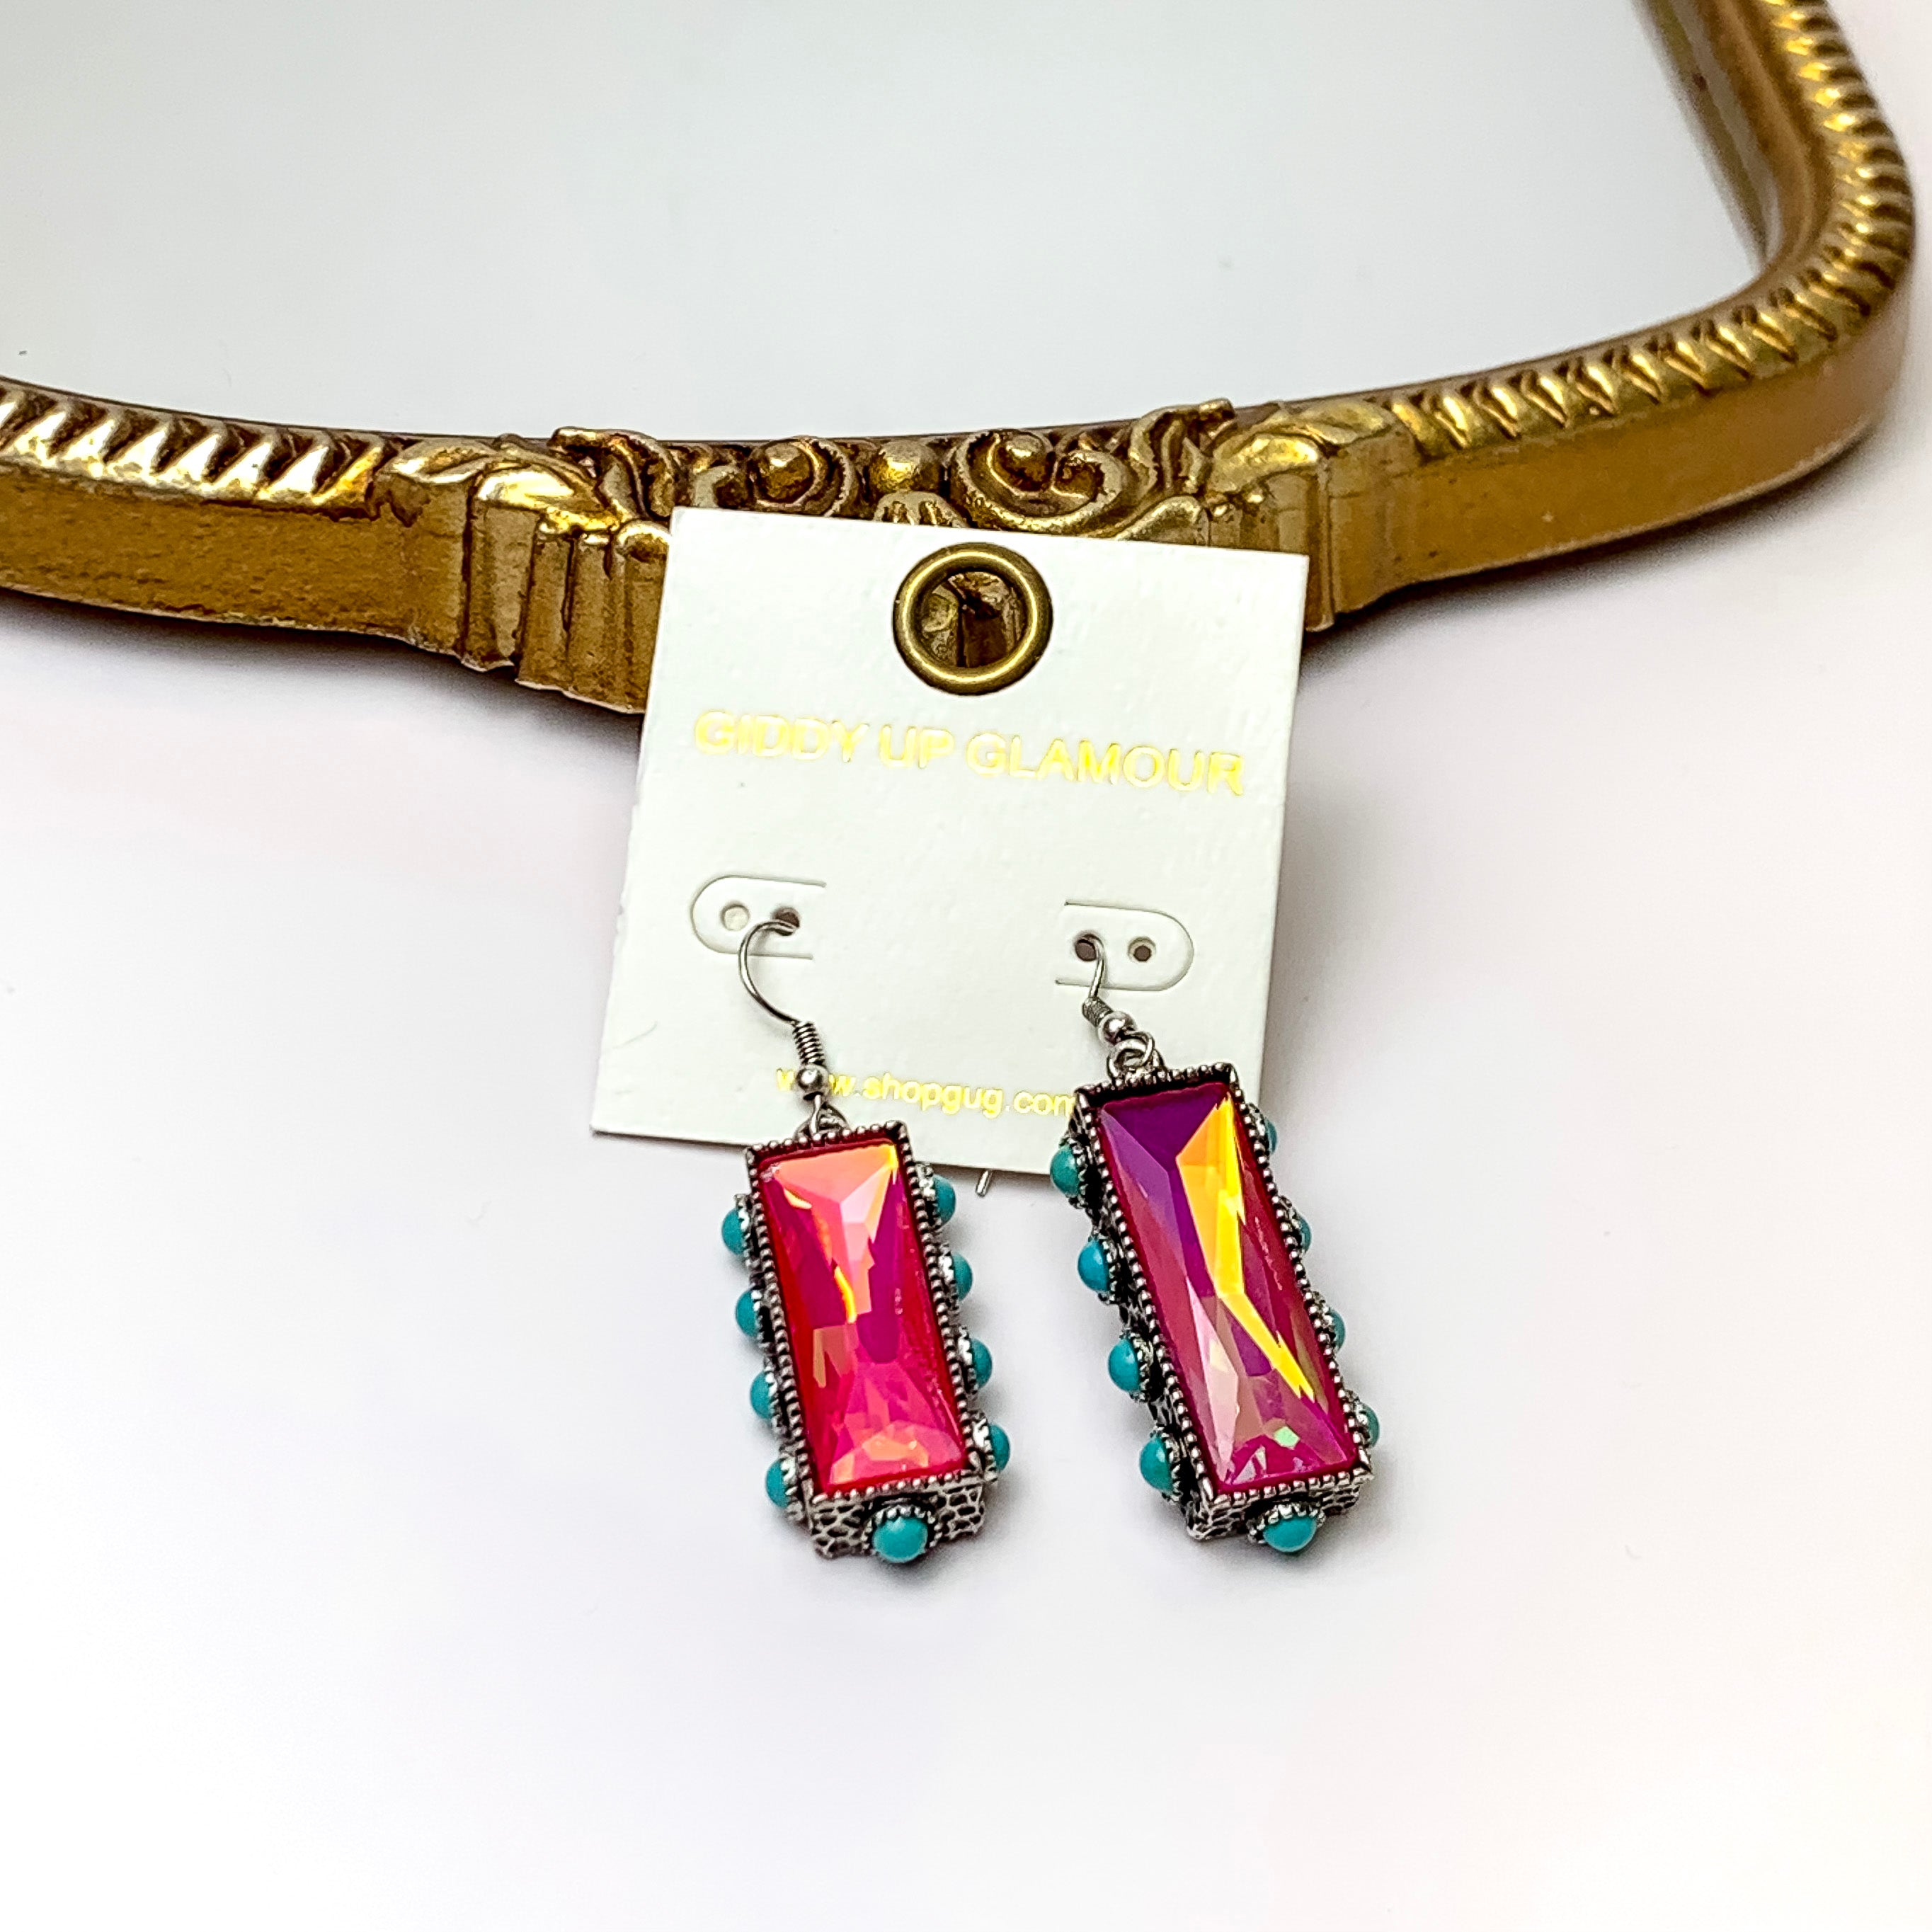 Fuchsia Pink Crystal Bar Drop Earrings with Faux Turquoise Border Accents - Giddy Up Glamour Boutique